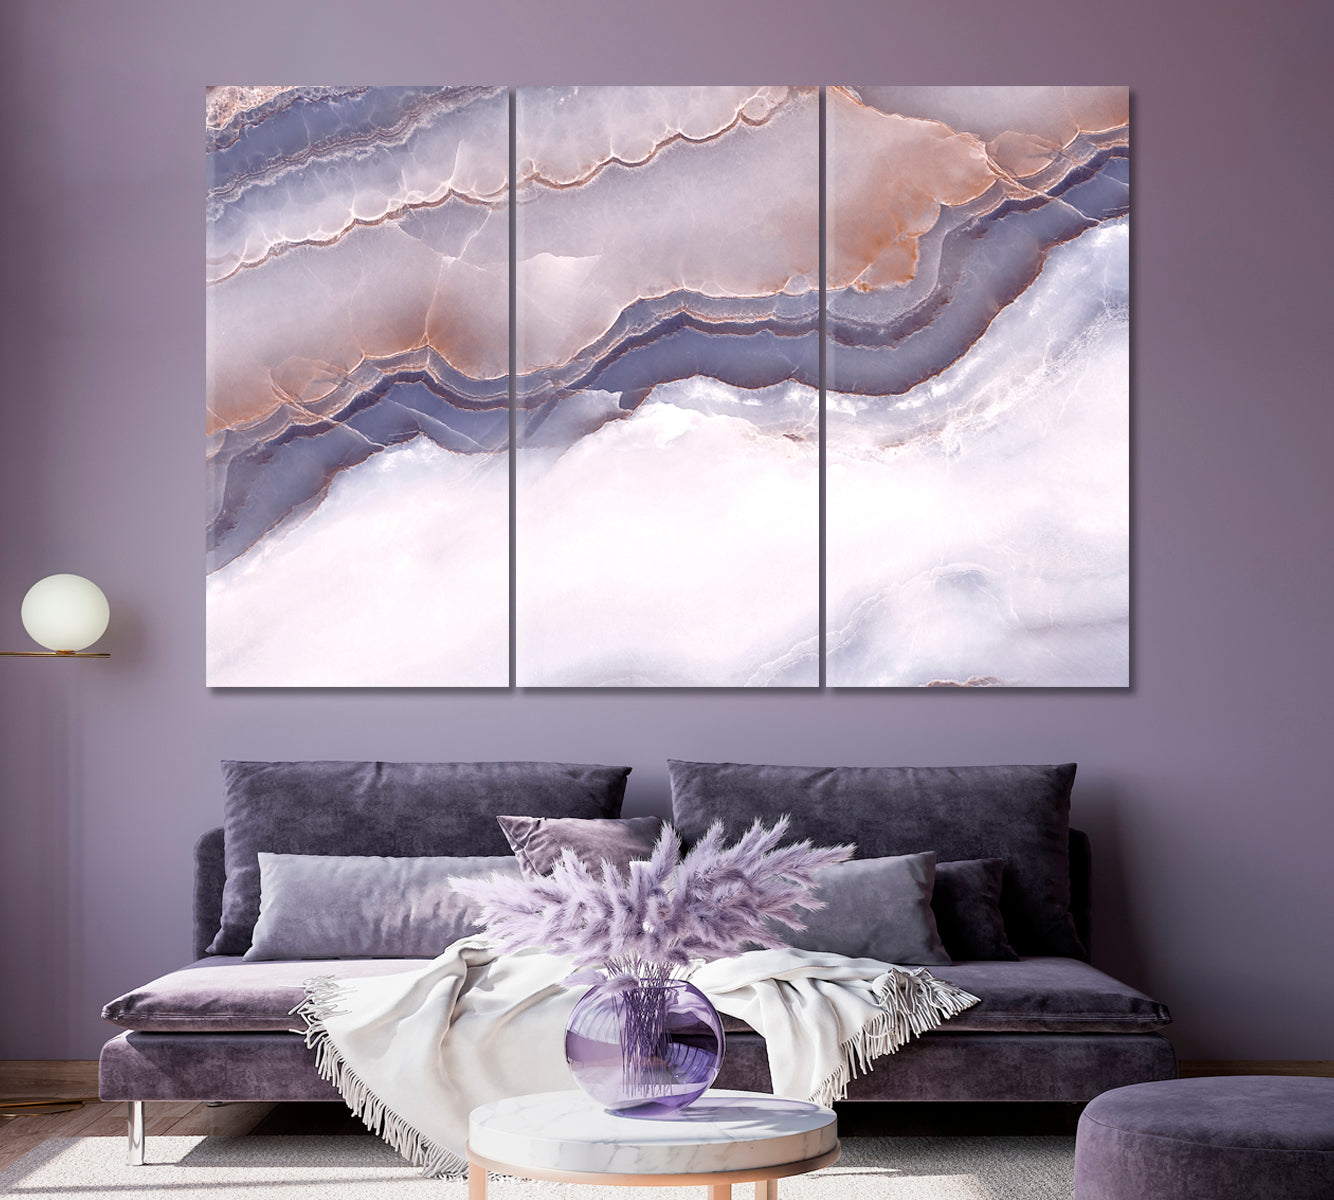 Luxury Marble Stone Canvas Print ArtLexy 3 Panels 36"x24" inches 